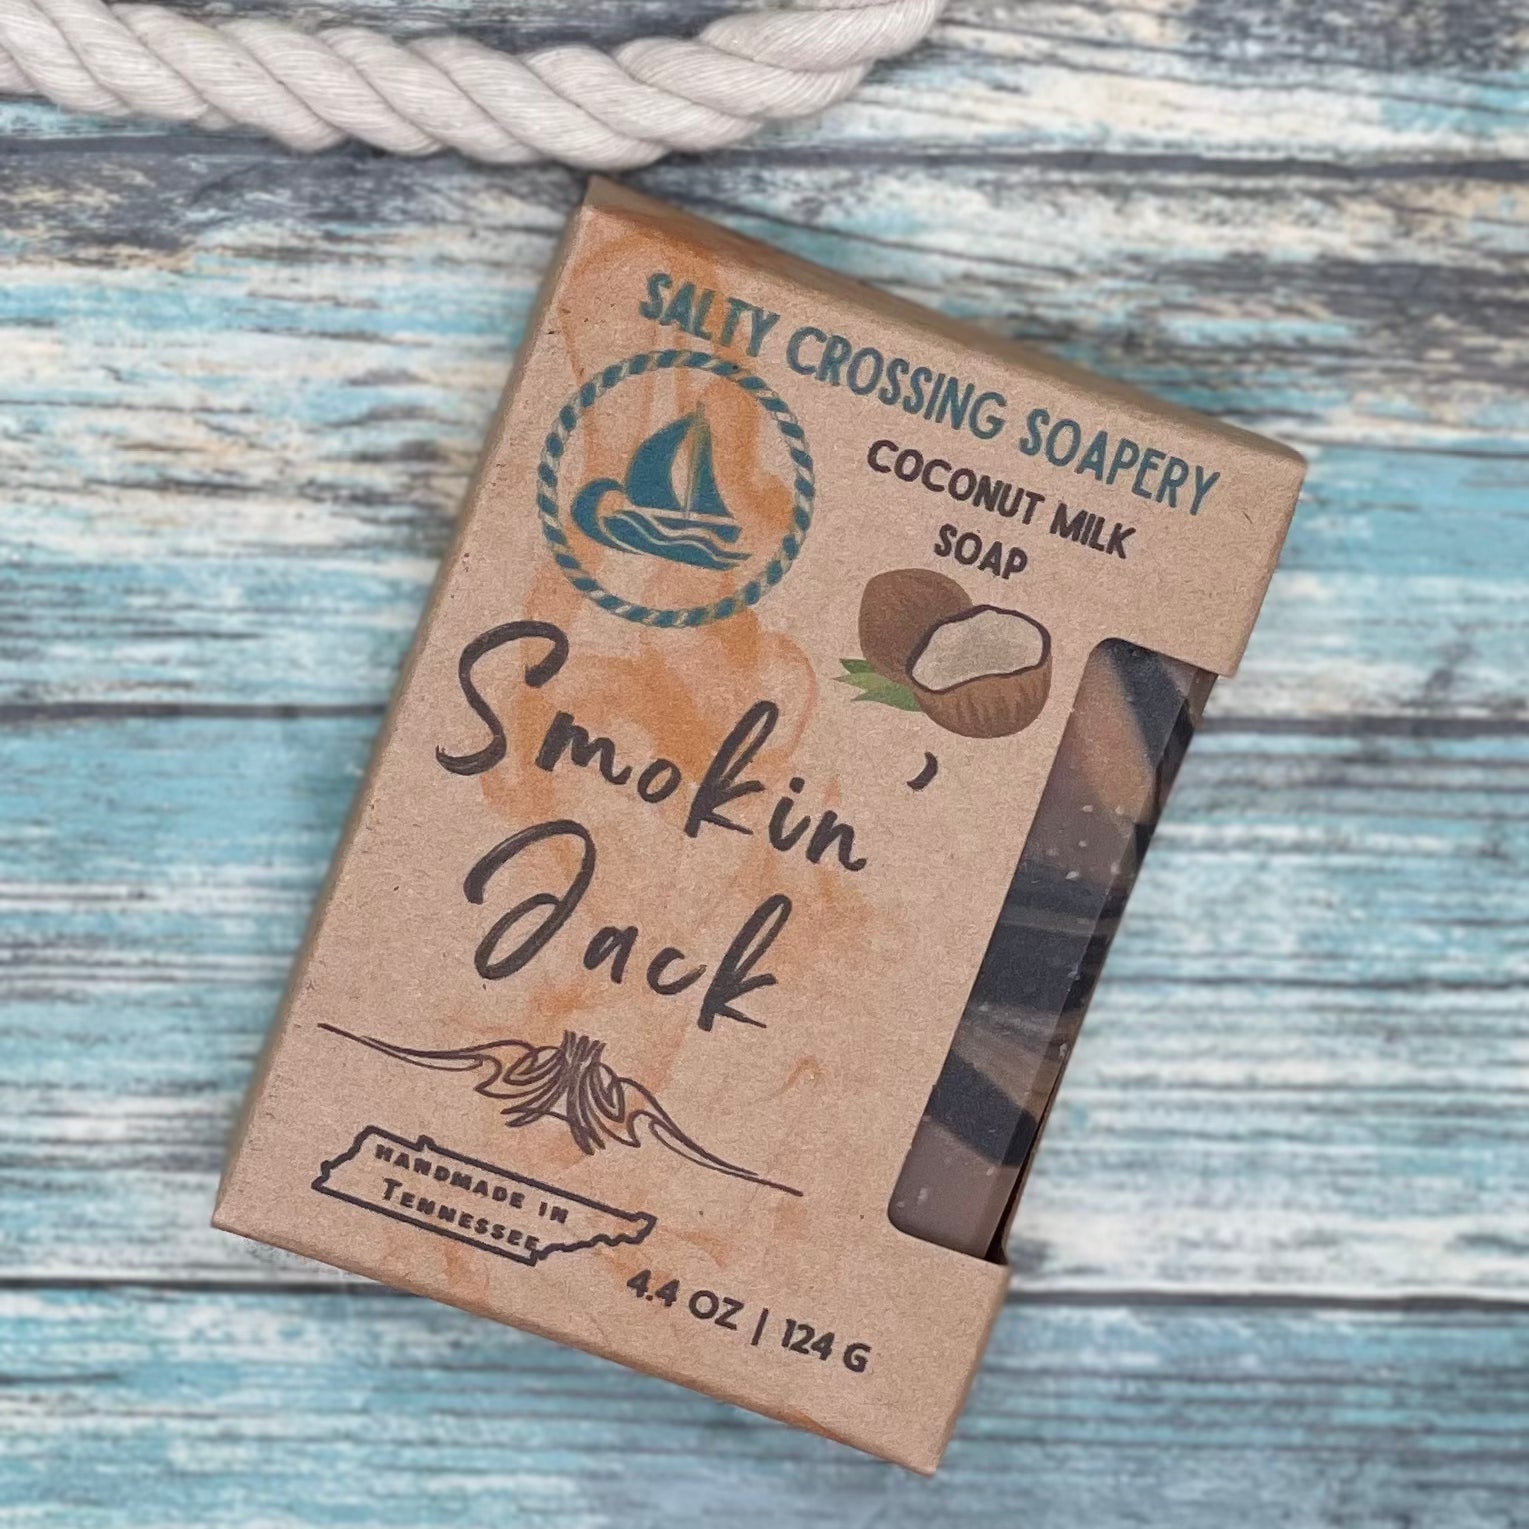 Smokin jack soap for men in box. Close up. Box in kraft paperboard with color text and graphics.